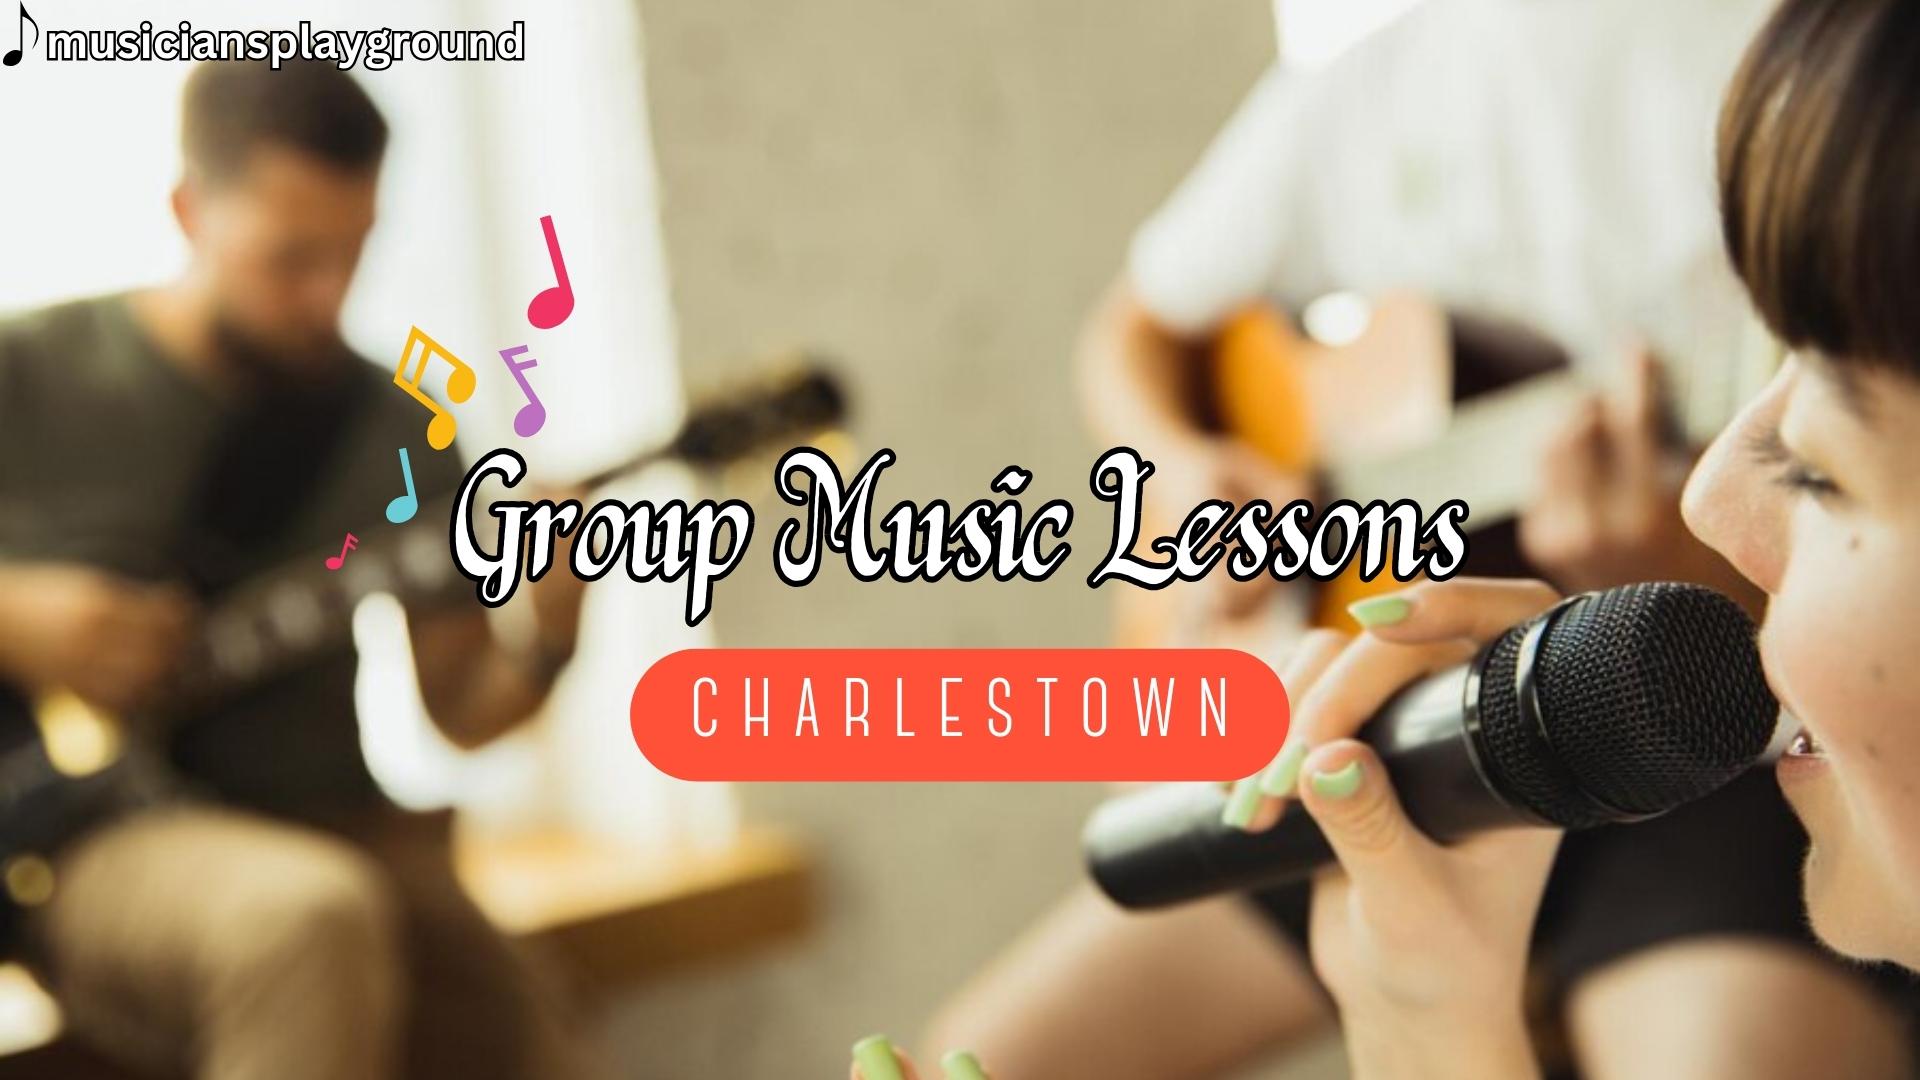 Group Music Lessons in Charlestown: Collaborative Music Learning at Musicians Playground